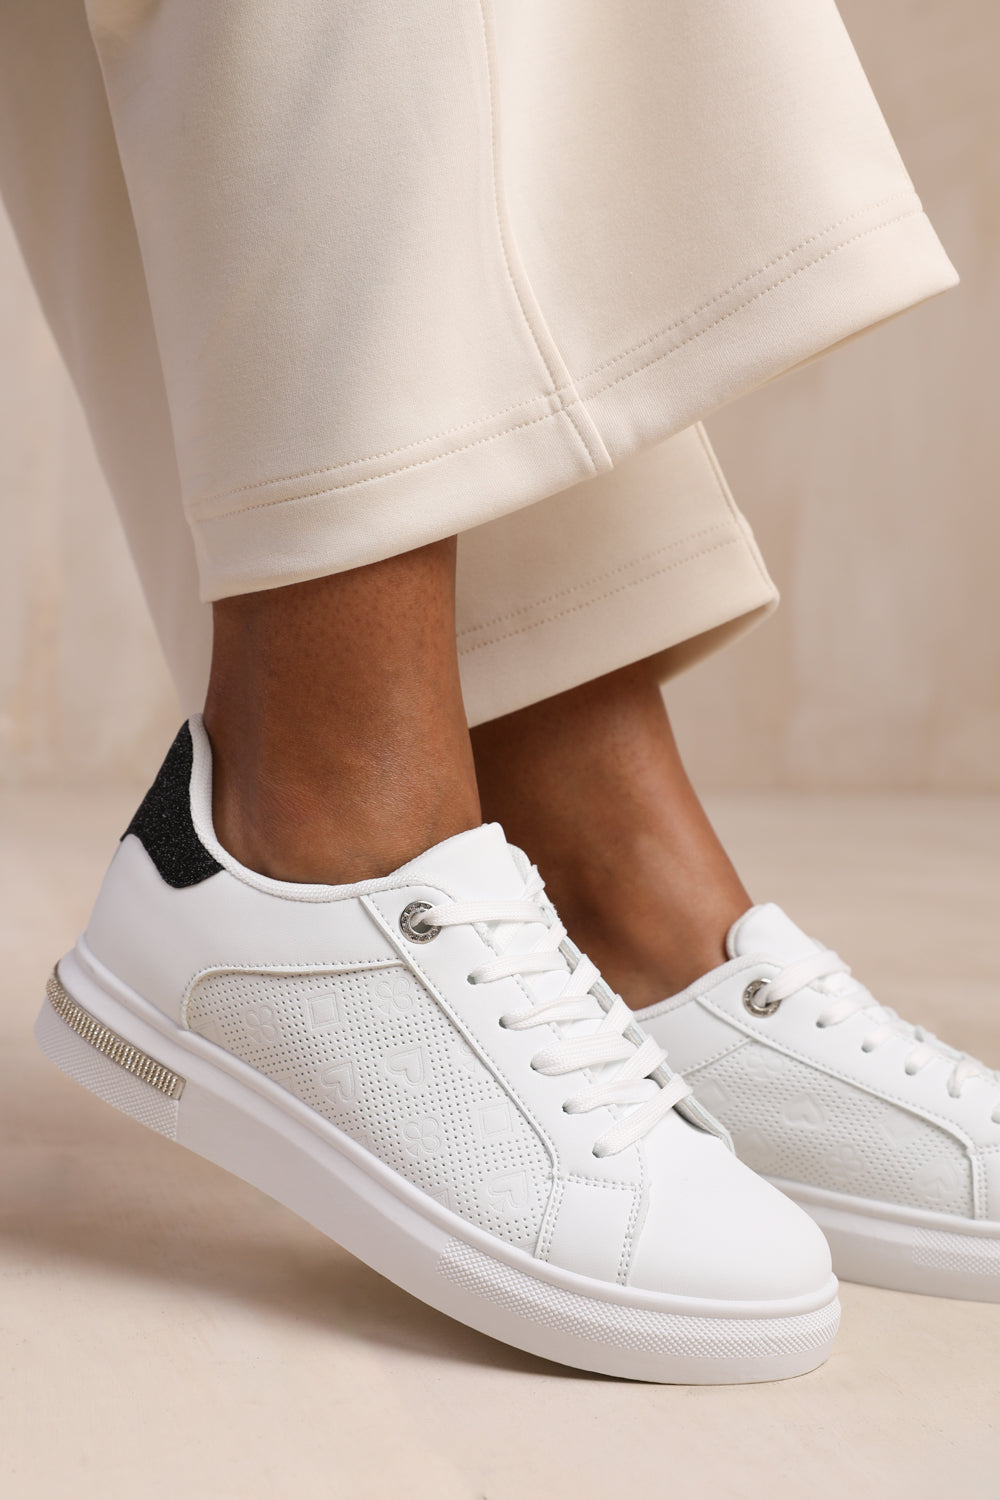 TOKYO CRYSTAL TRIM WITH EMBOSSED DETAILED TRAINERS IN WHITE/BLACK